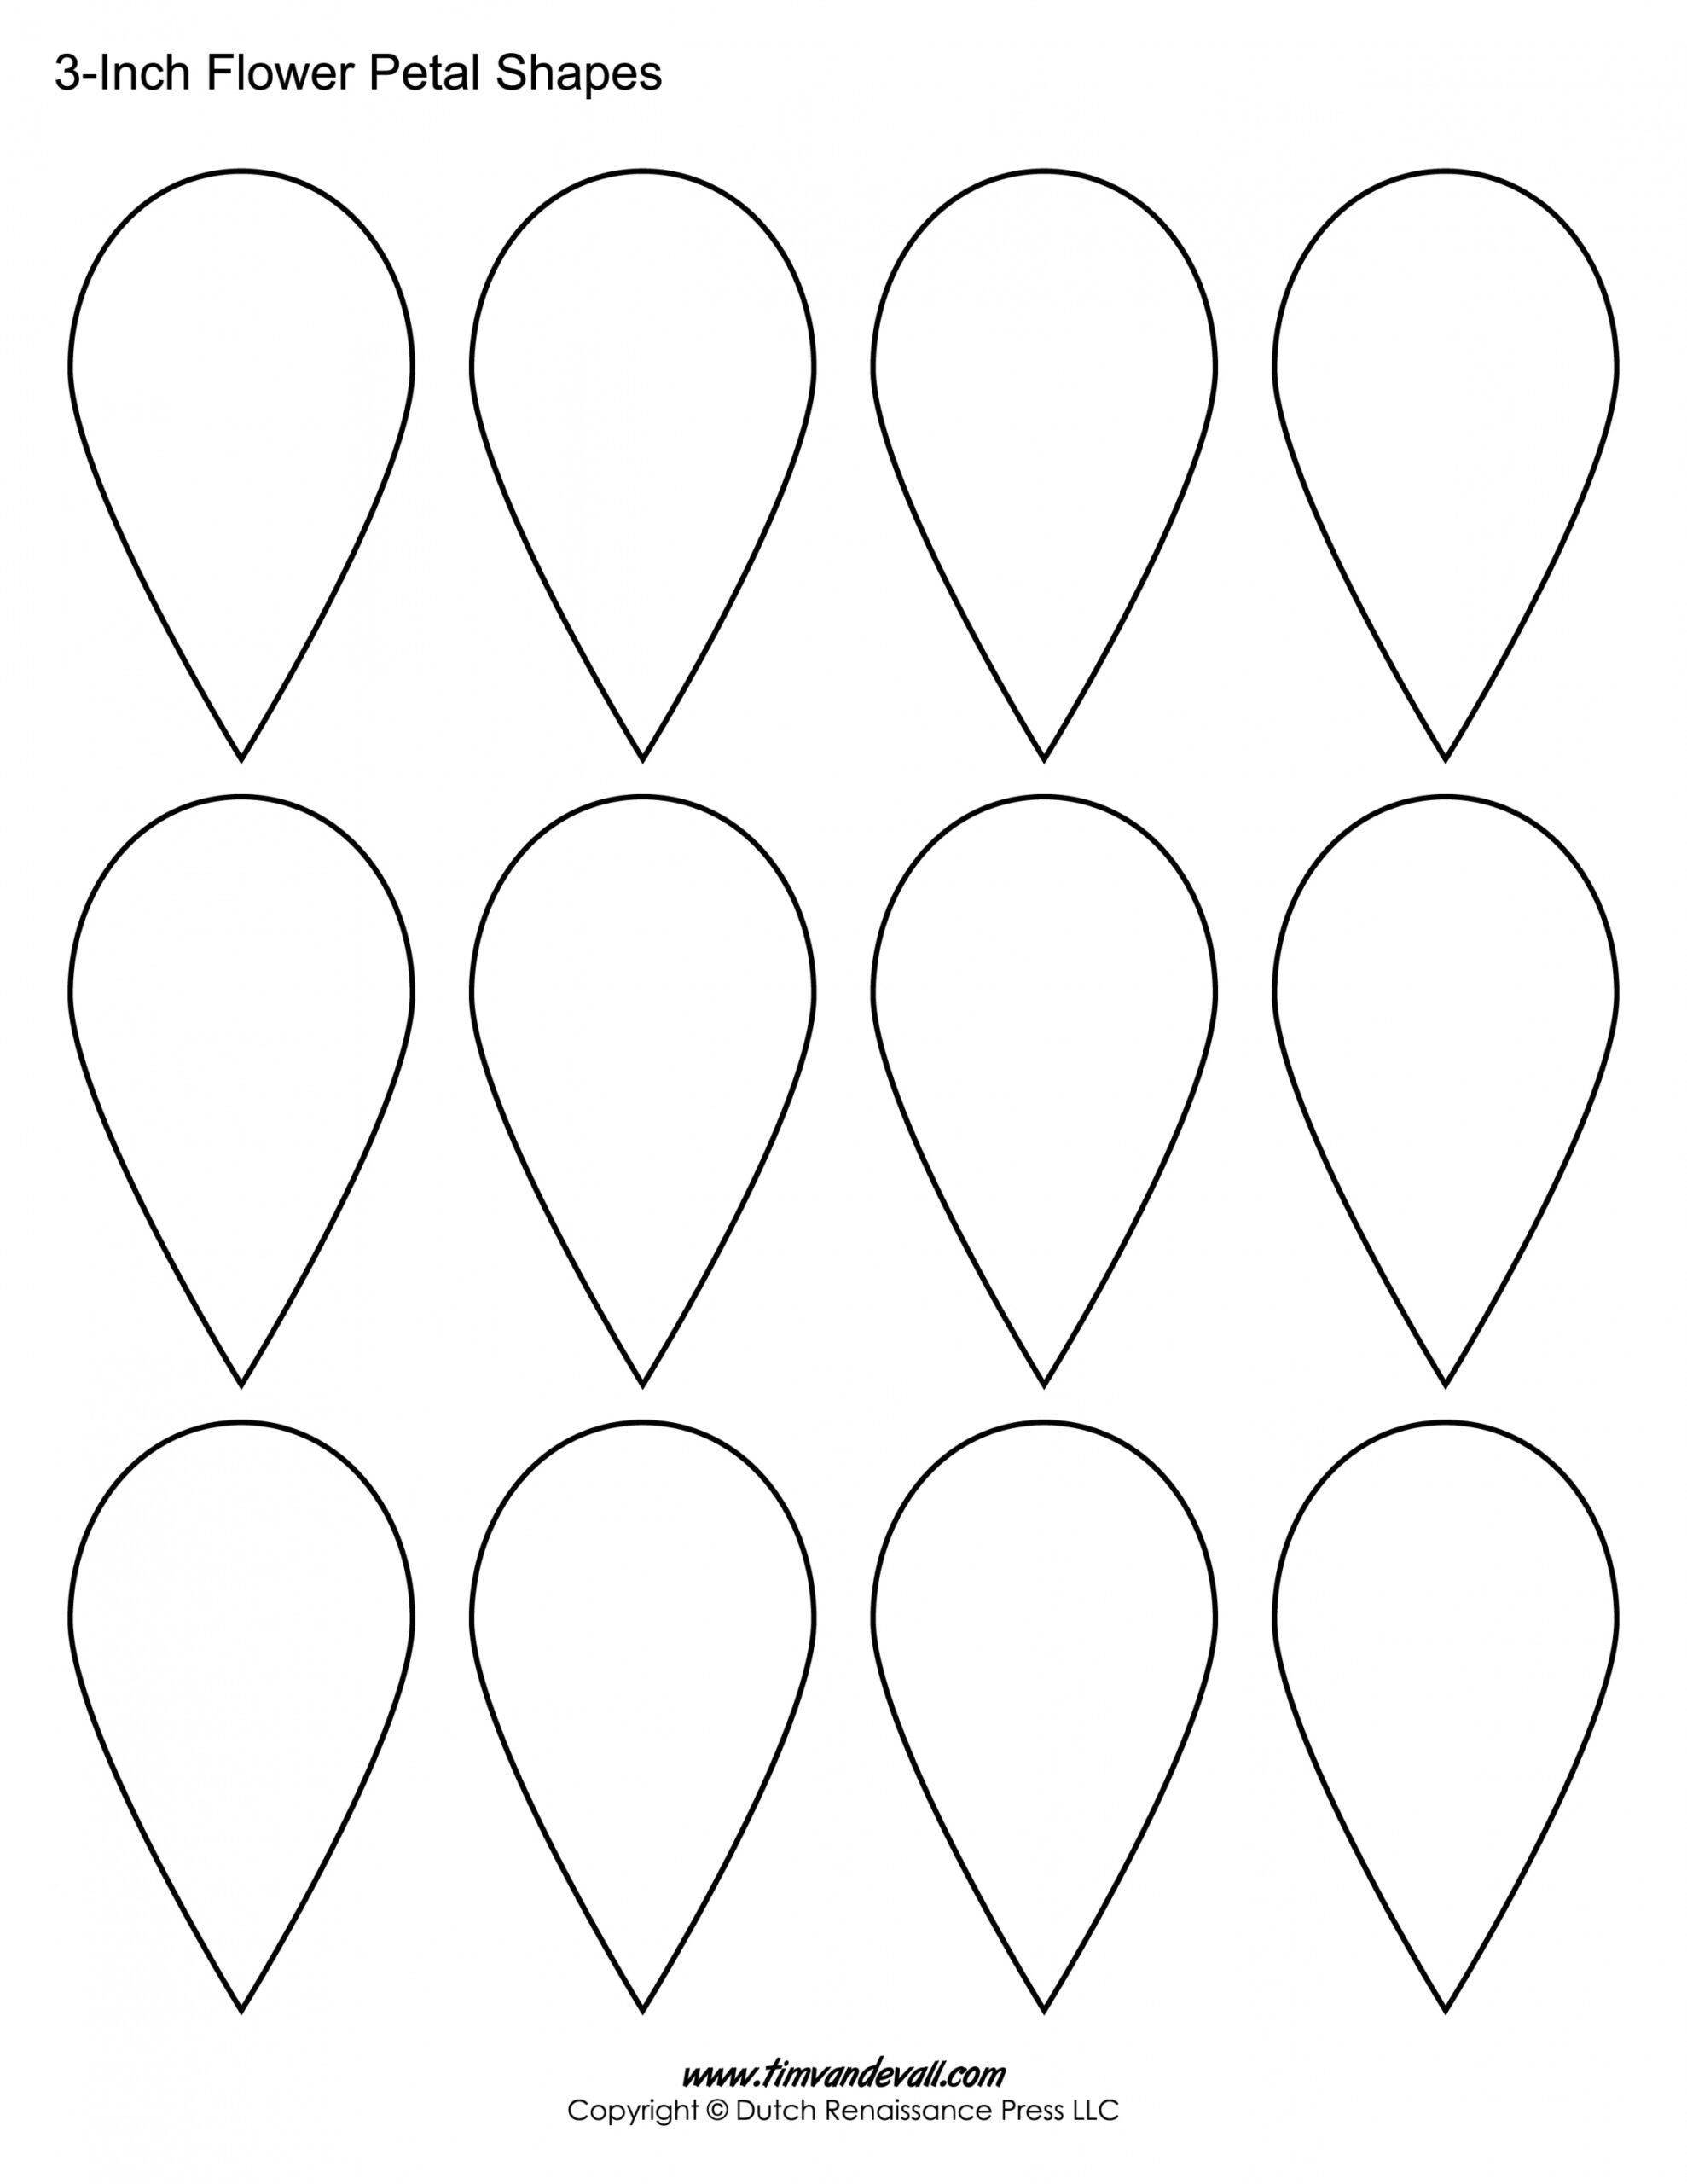 Cut Out Printable Free Paper Flower Petal Templates - Printable - Printable Flower Petal Templates for Making Paper Flowers